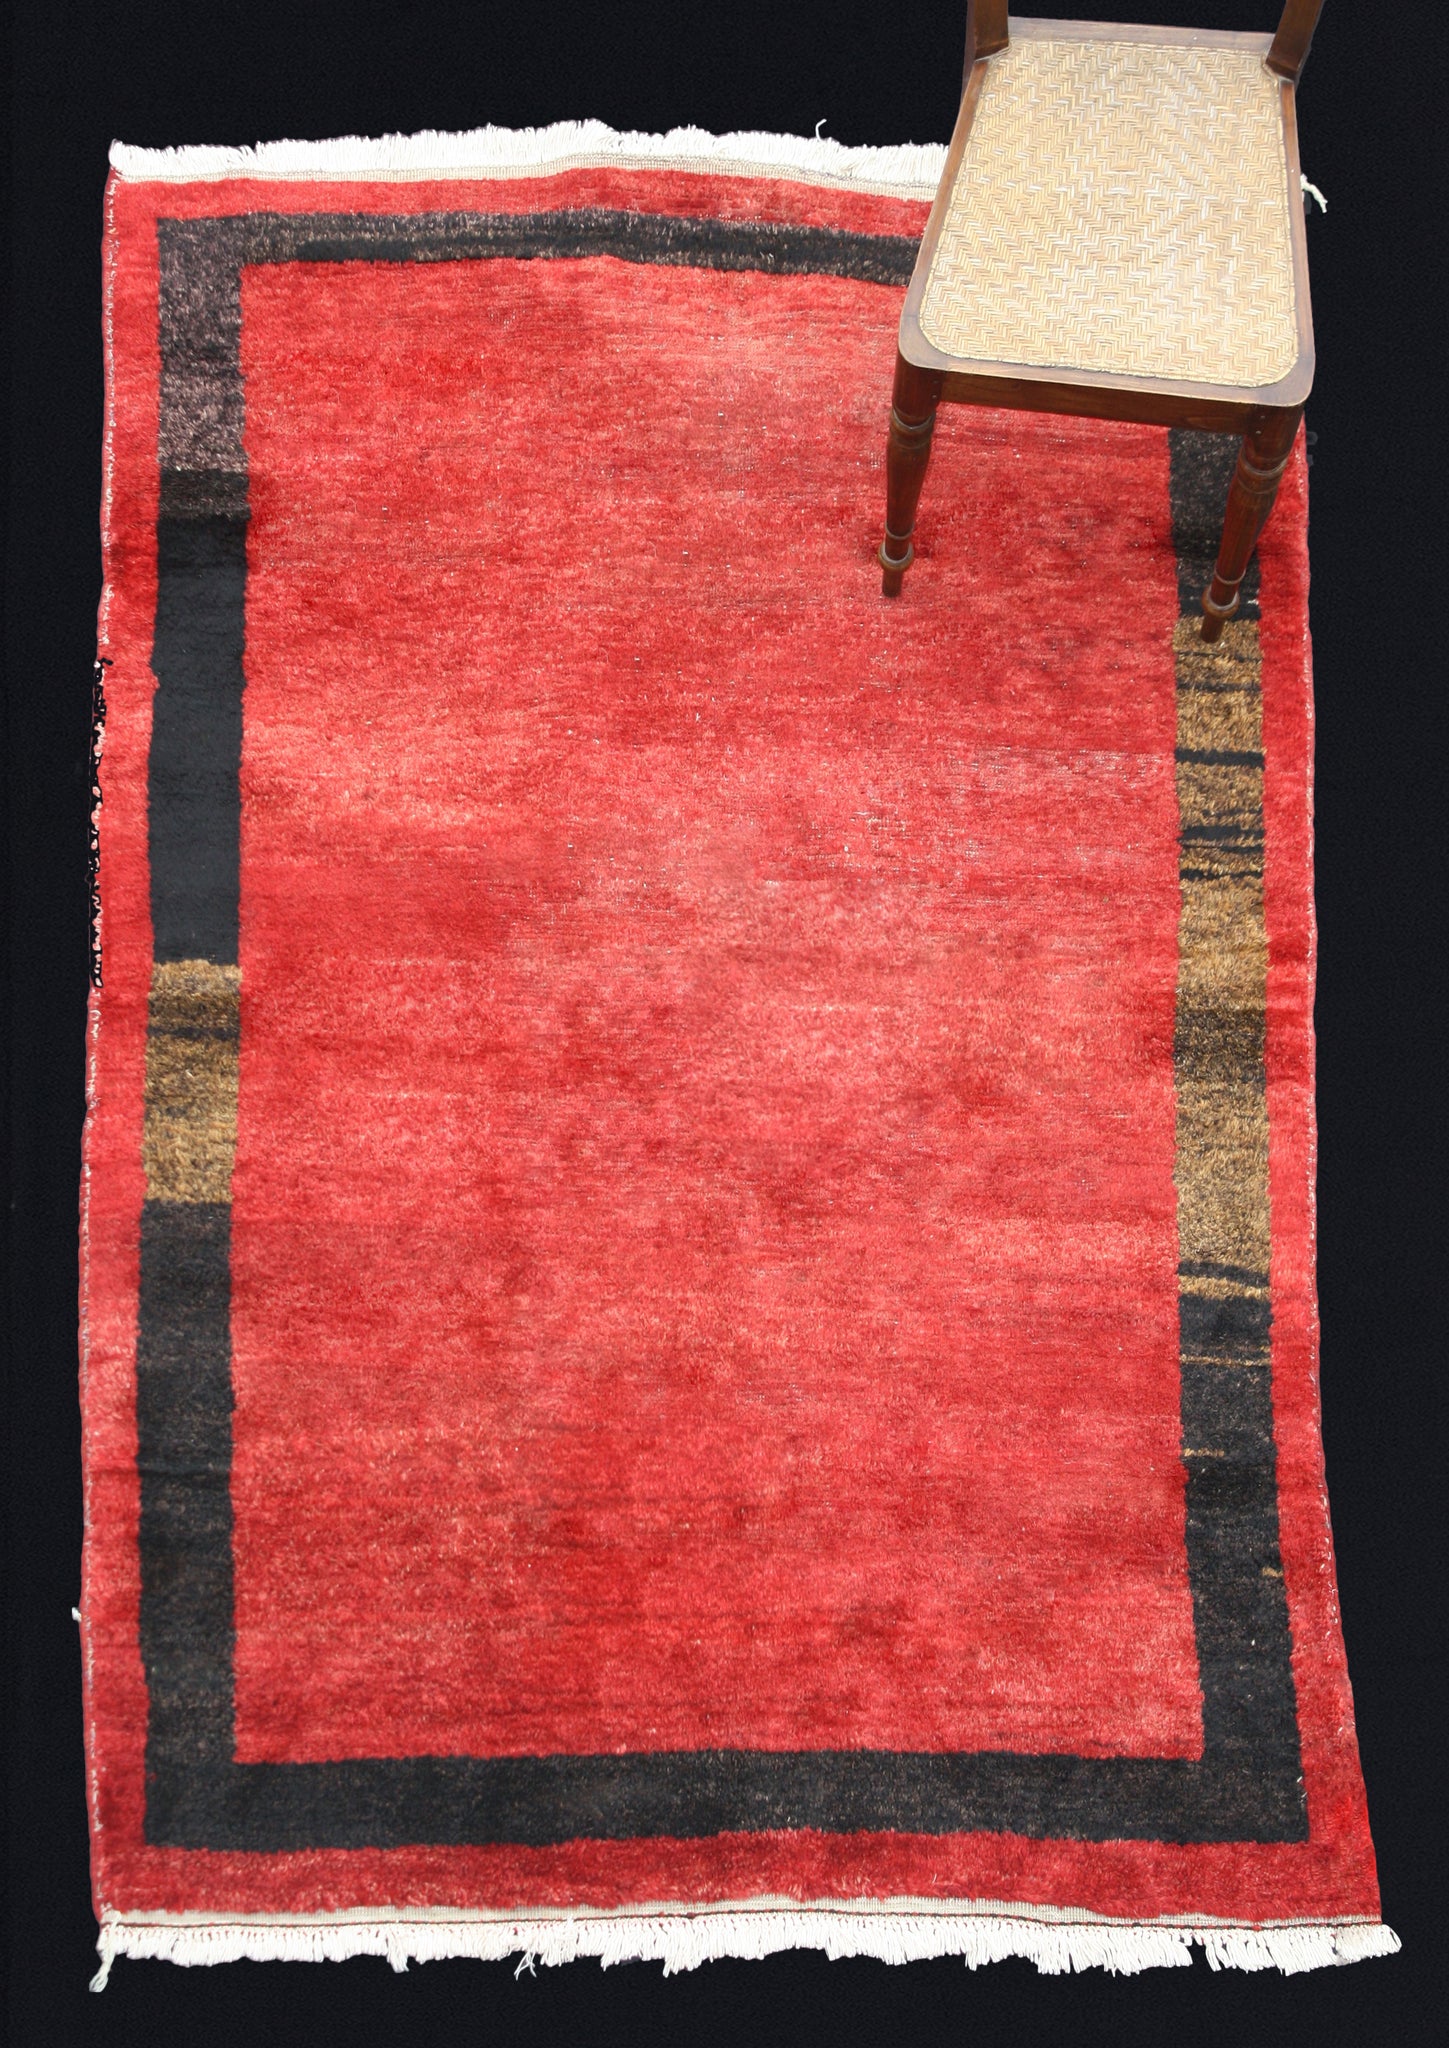 Konya Carpet With Red Center And Black Border (5' x 7' 2'')